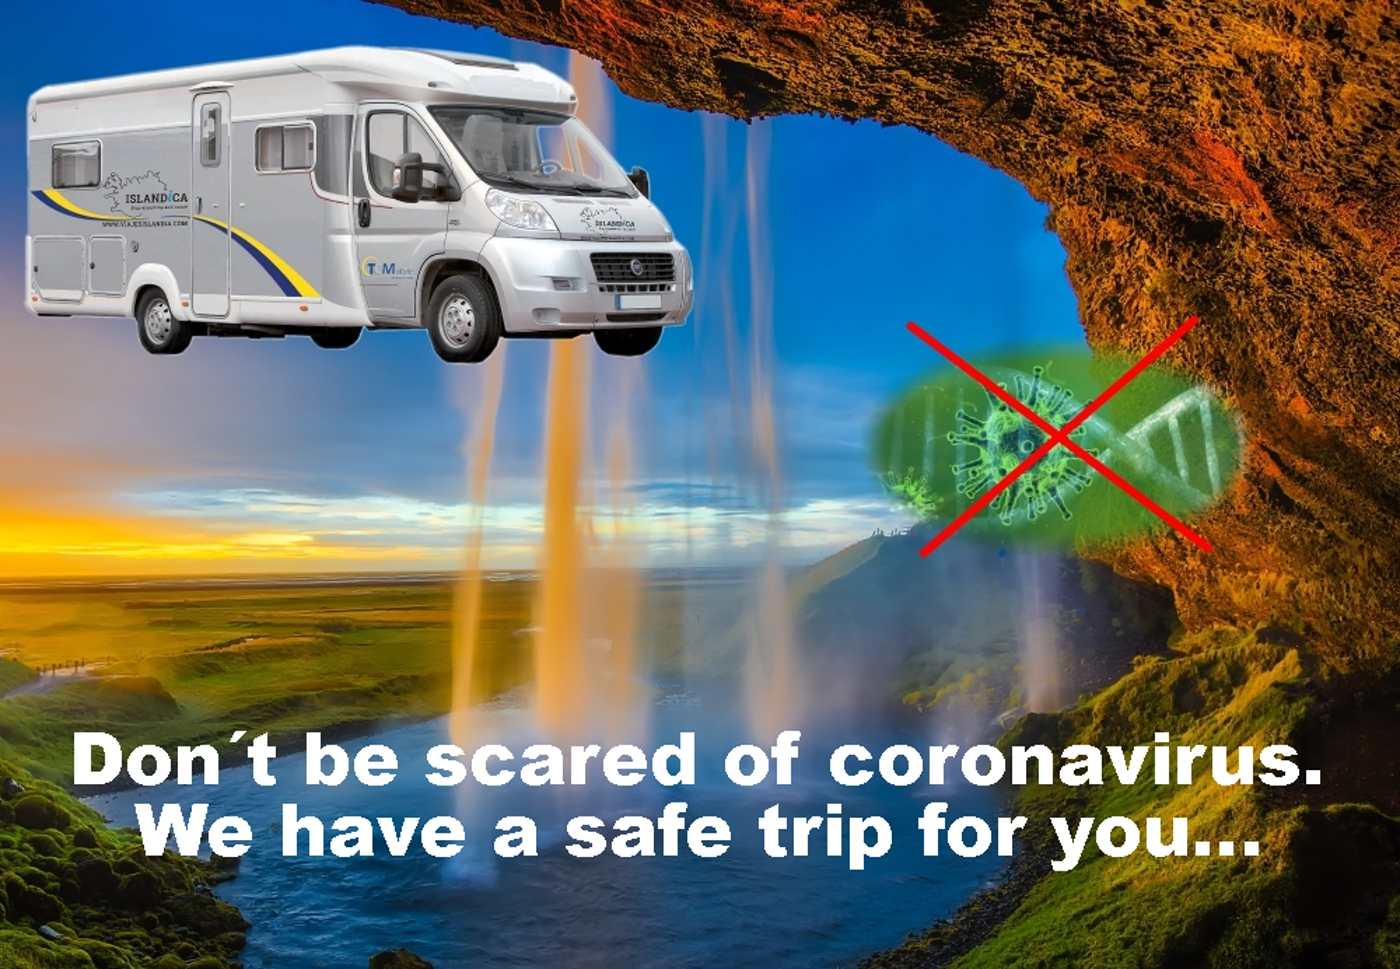 Do not be afraid of the coronavirus and come to Iceland, we have the perfect trip for you and your safety!